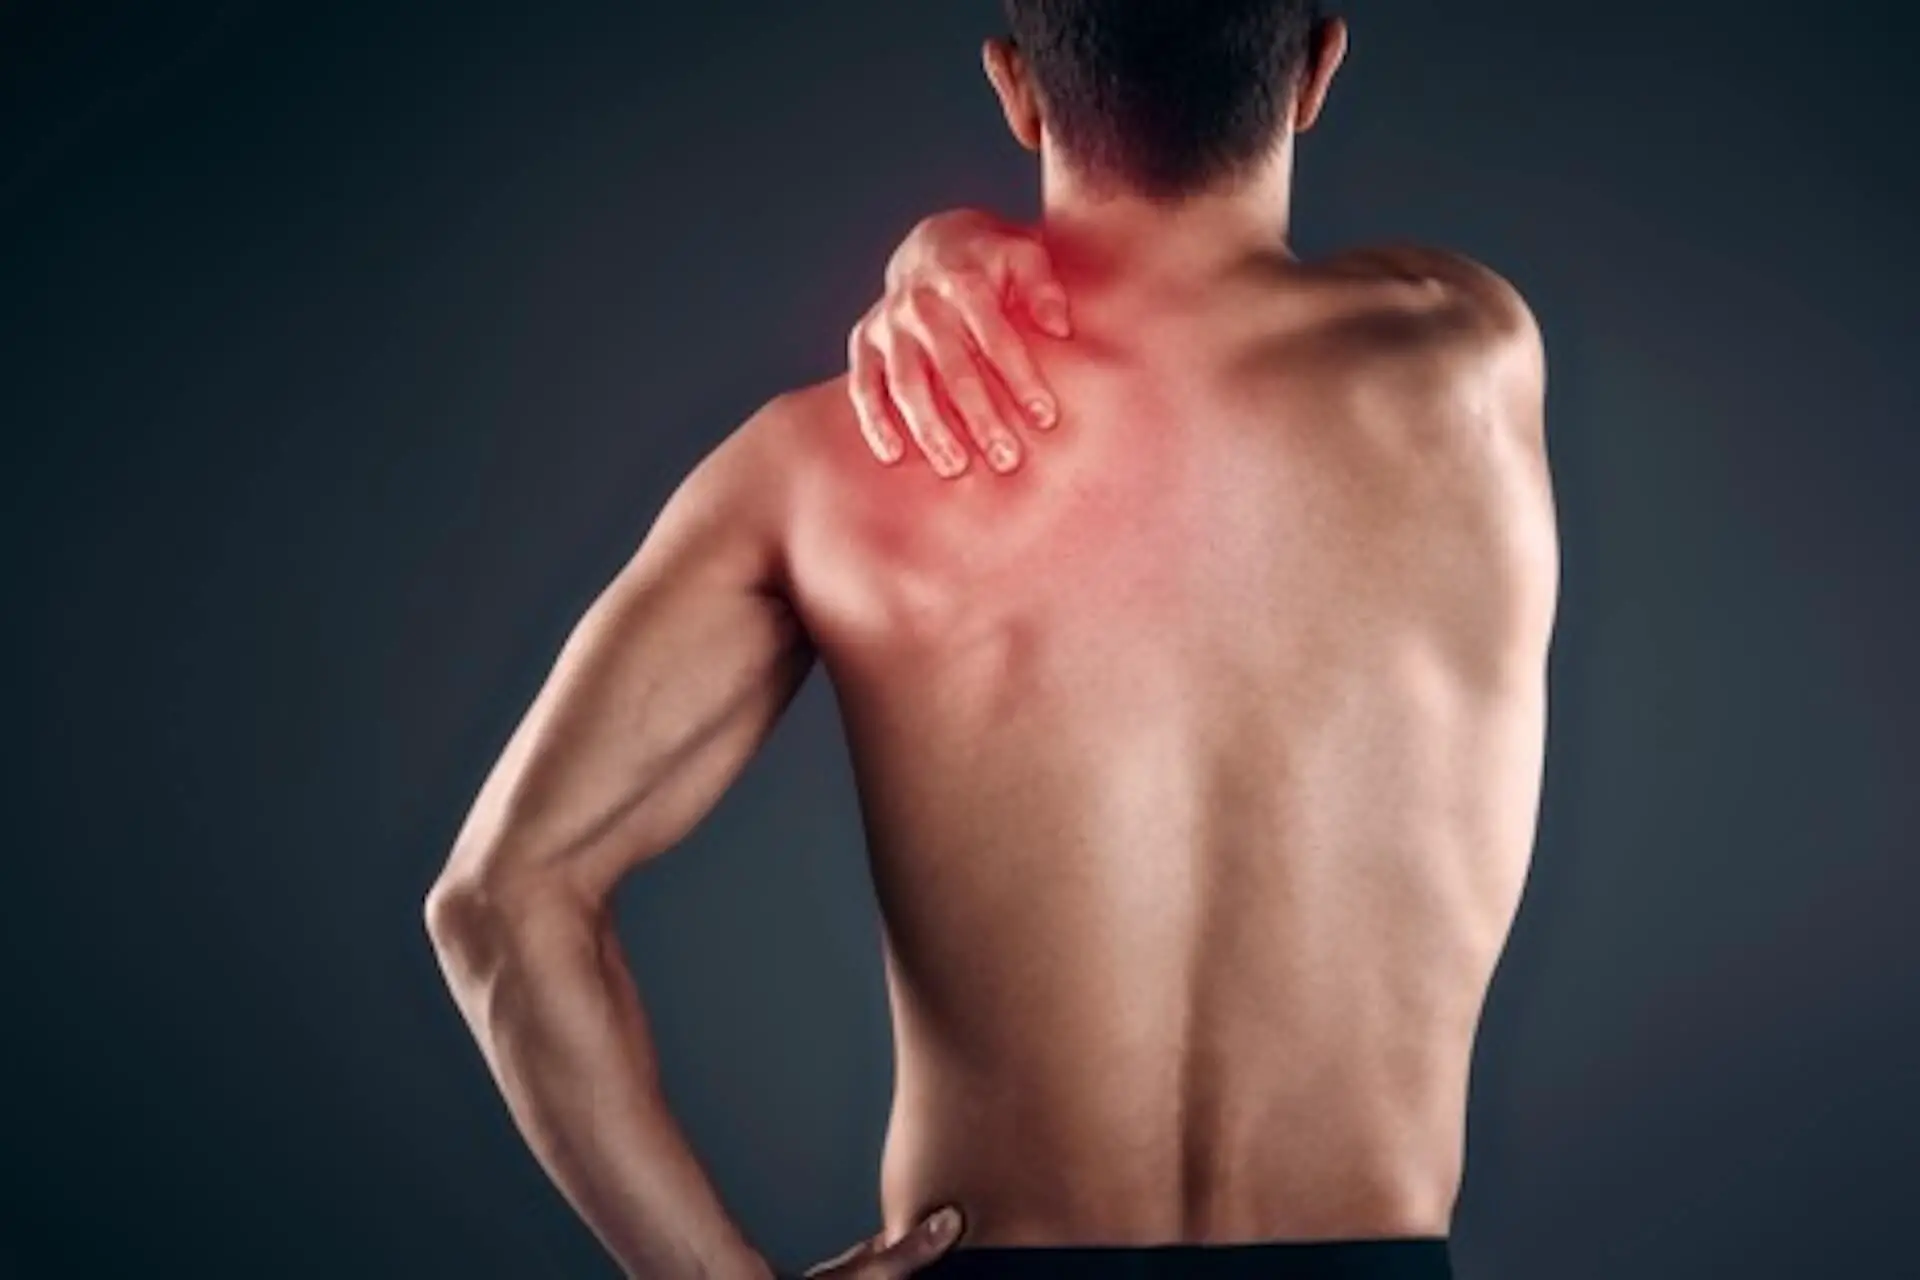 How to Treat Upper Back Pain Without Prescription Drugs?